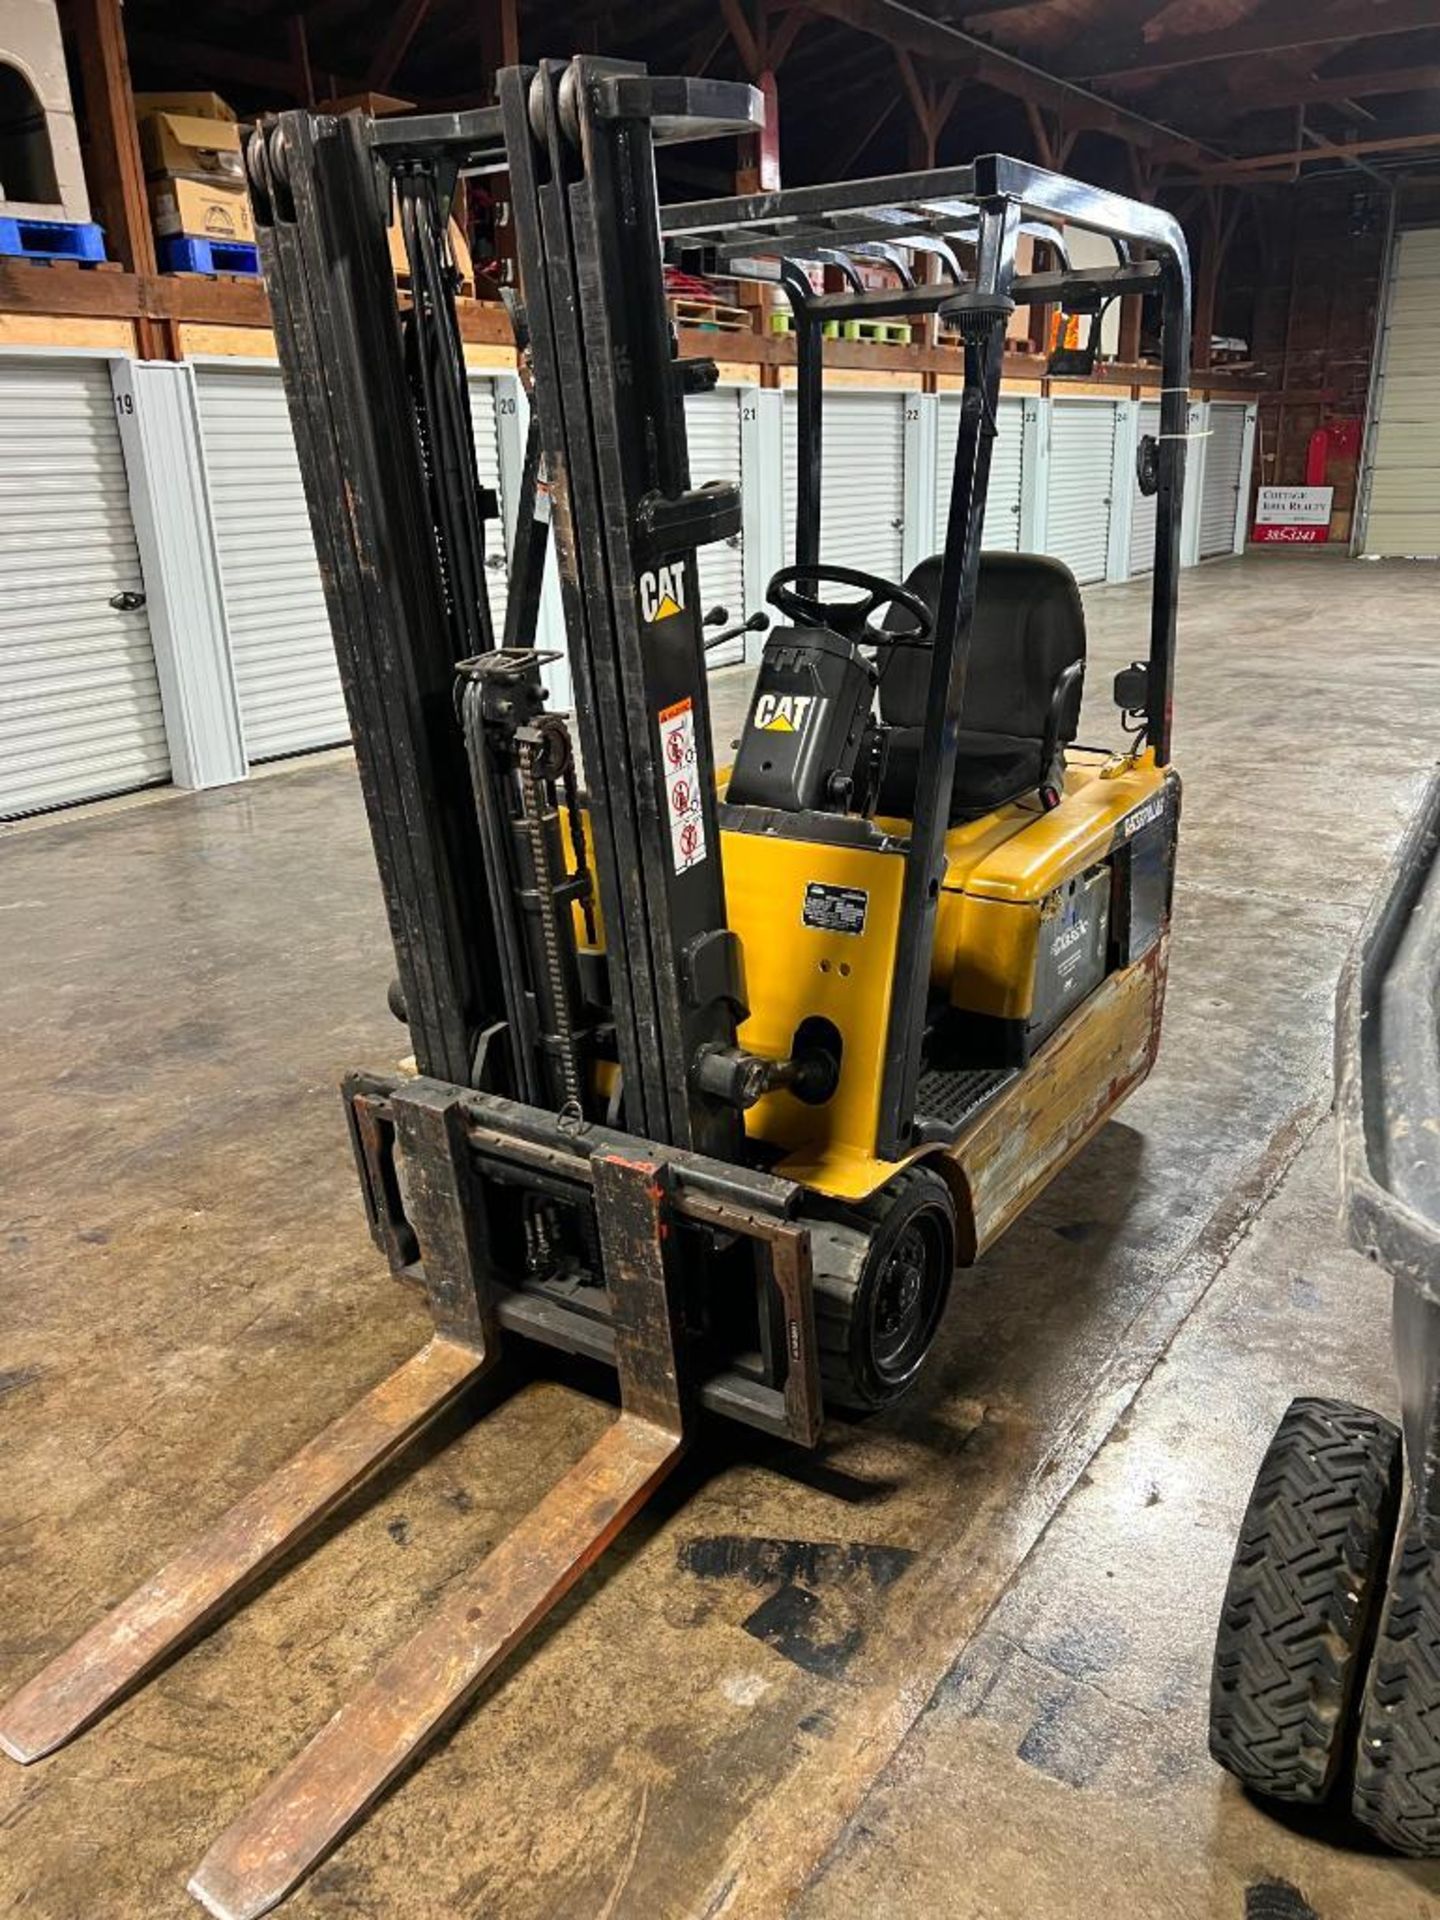 Caterpillar EP16KT Three Wheel Electric Forklift, Hours 3940.7, Serial #ETB4B01714. Located in Mt. P